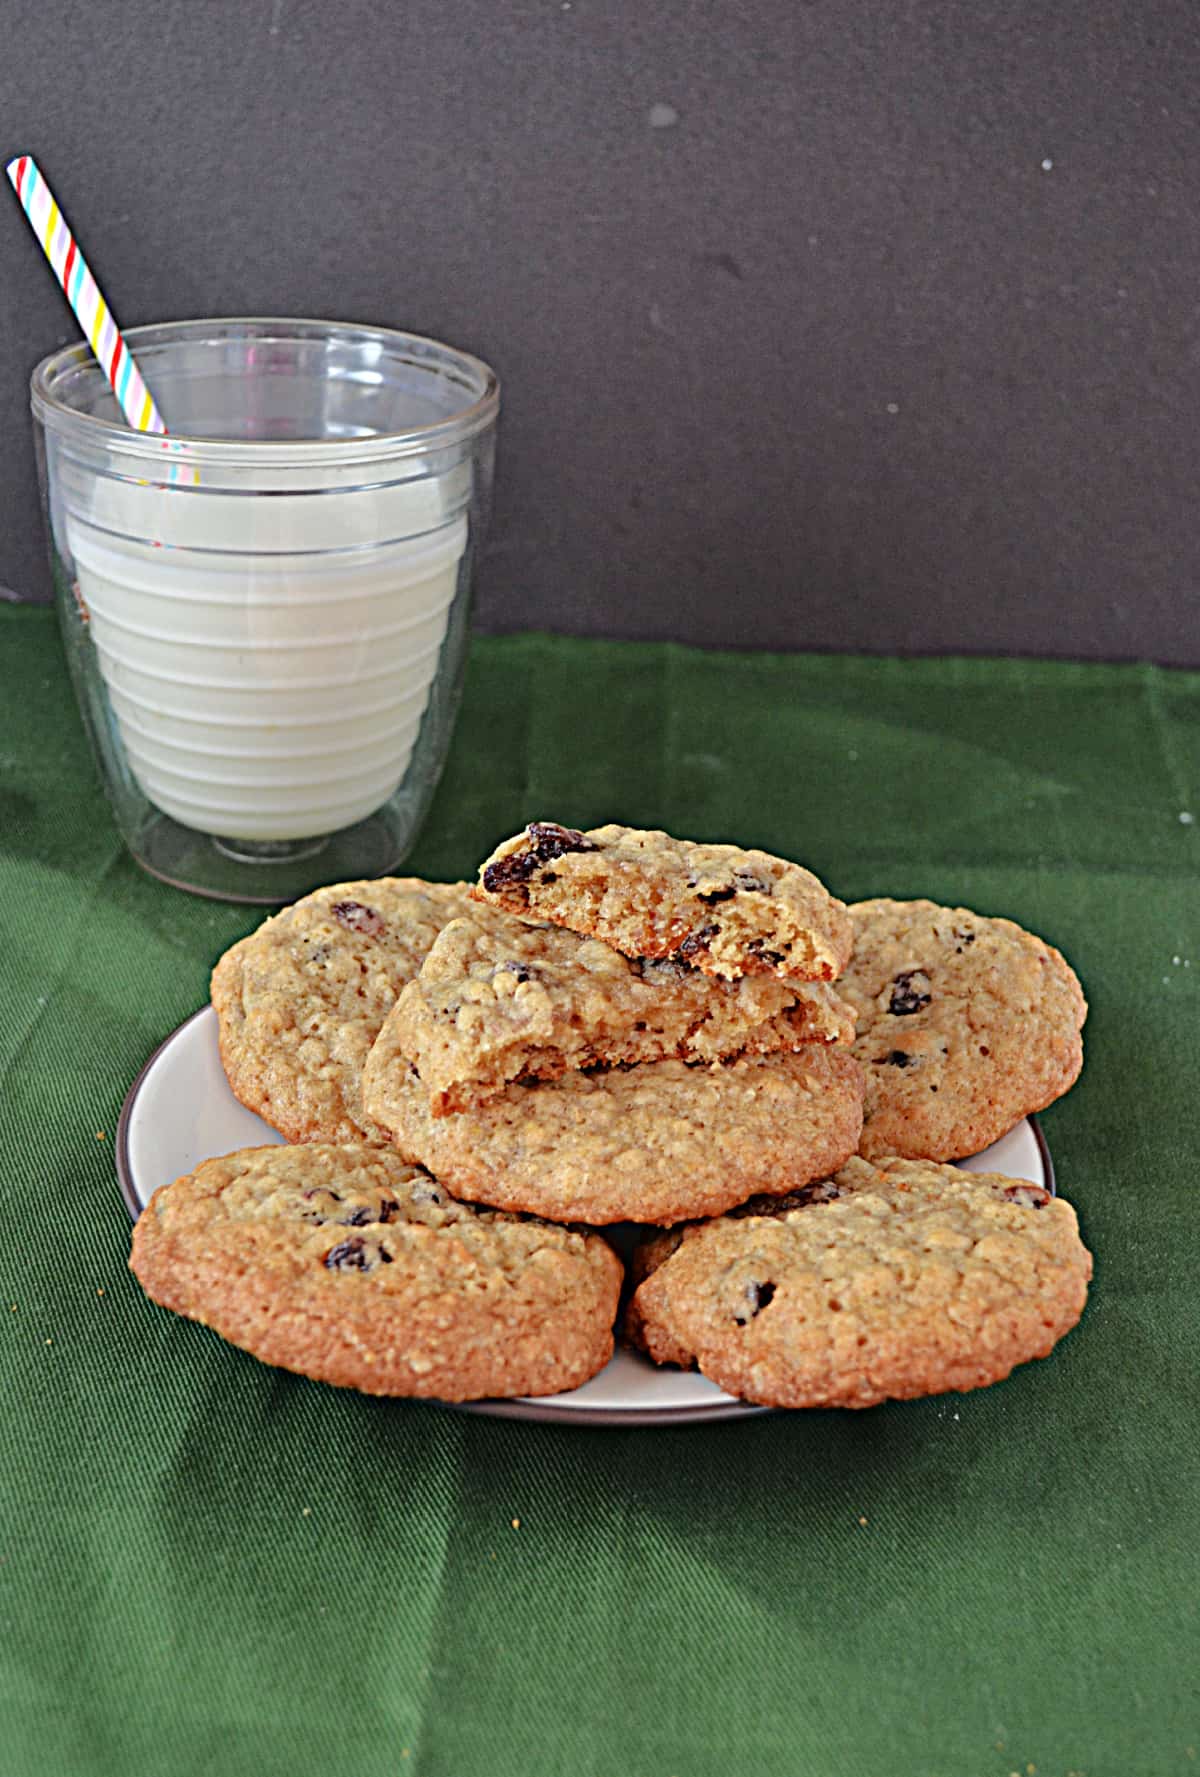 A plate of oatmeal raisin cookies with a cookie broke in half and a glass of milk behind the plate.